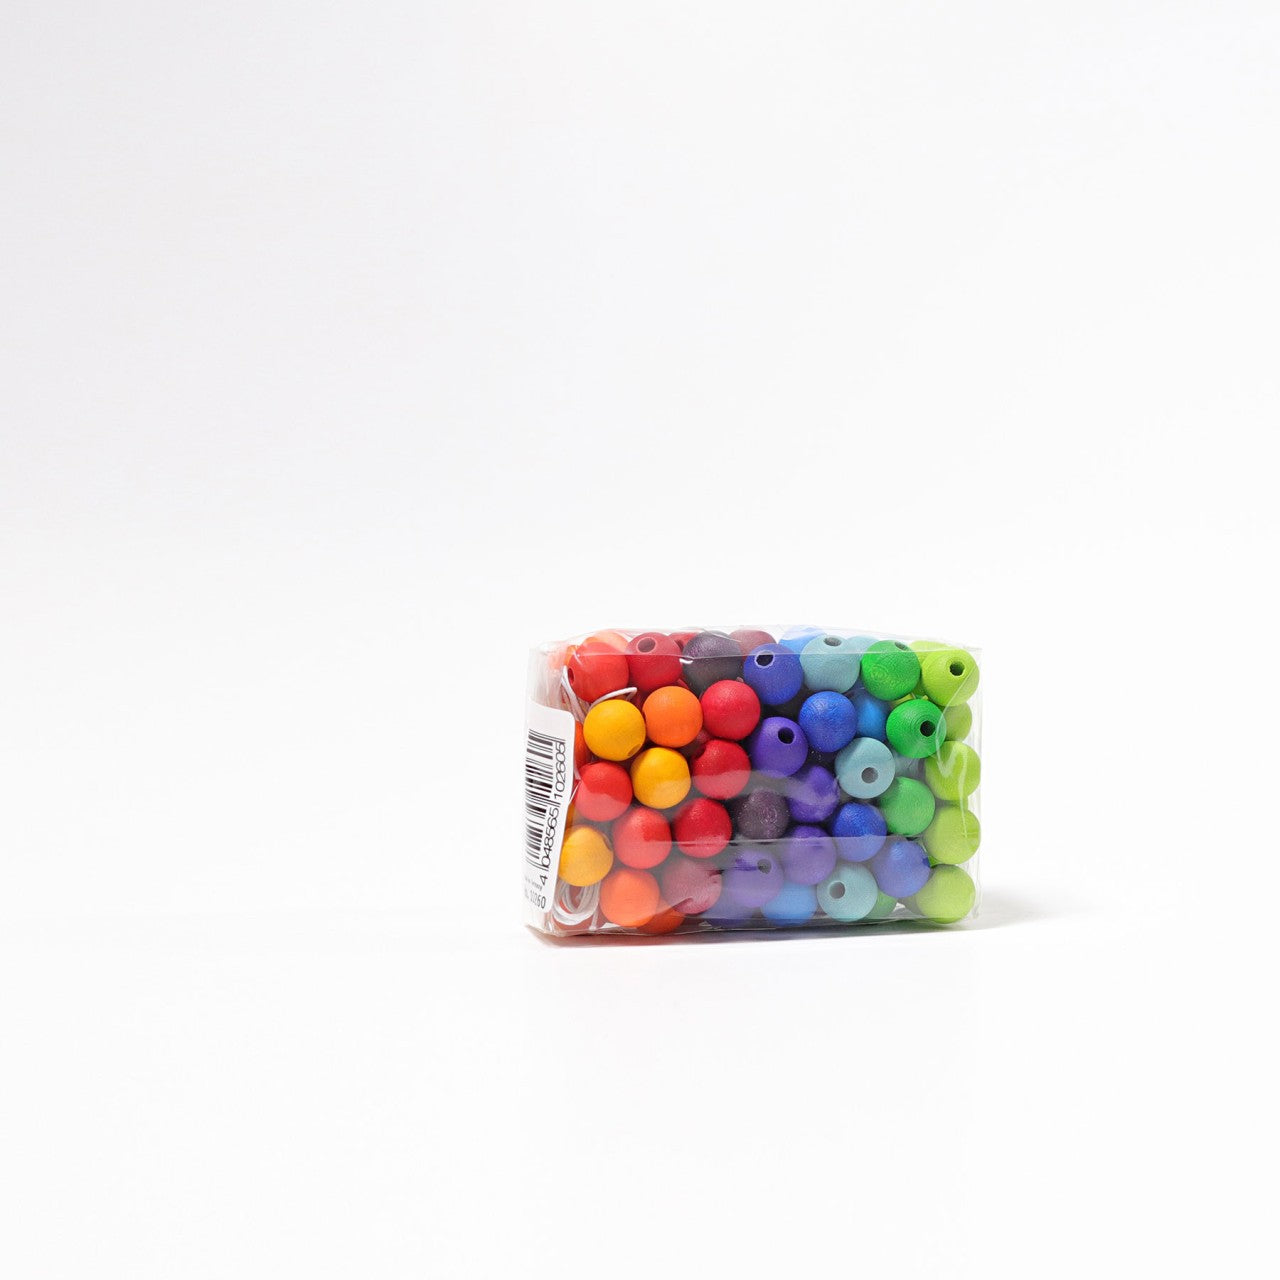 Grimm's Colorful Wooden Beads Pack of 120